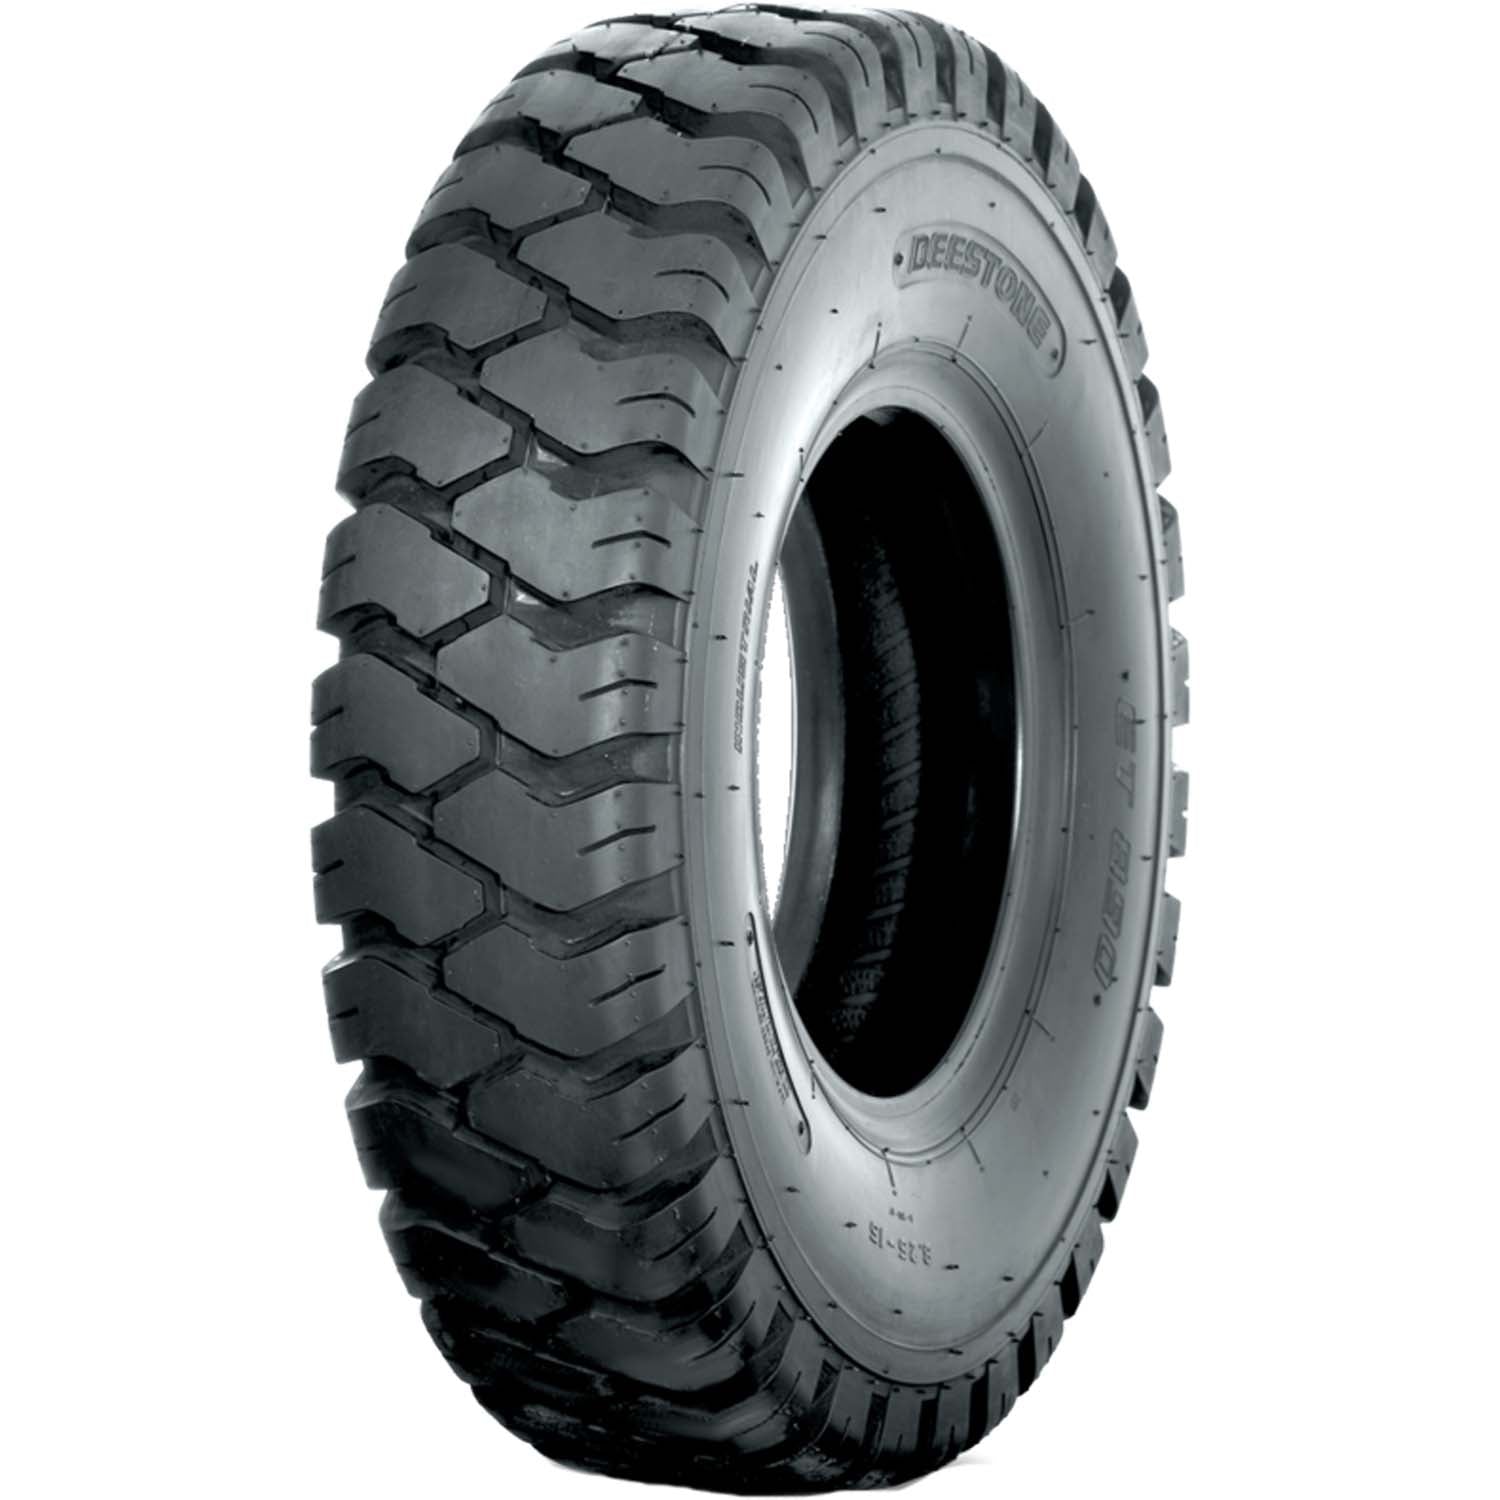 Deestone D301 Forklift Tire With Flap 12ply 7.50-10